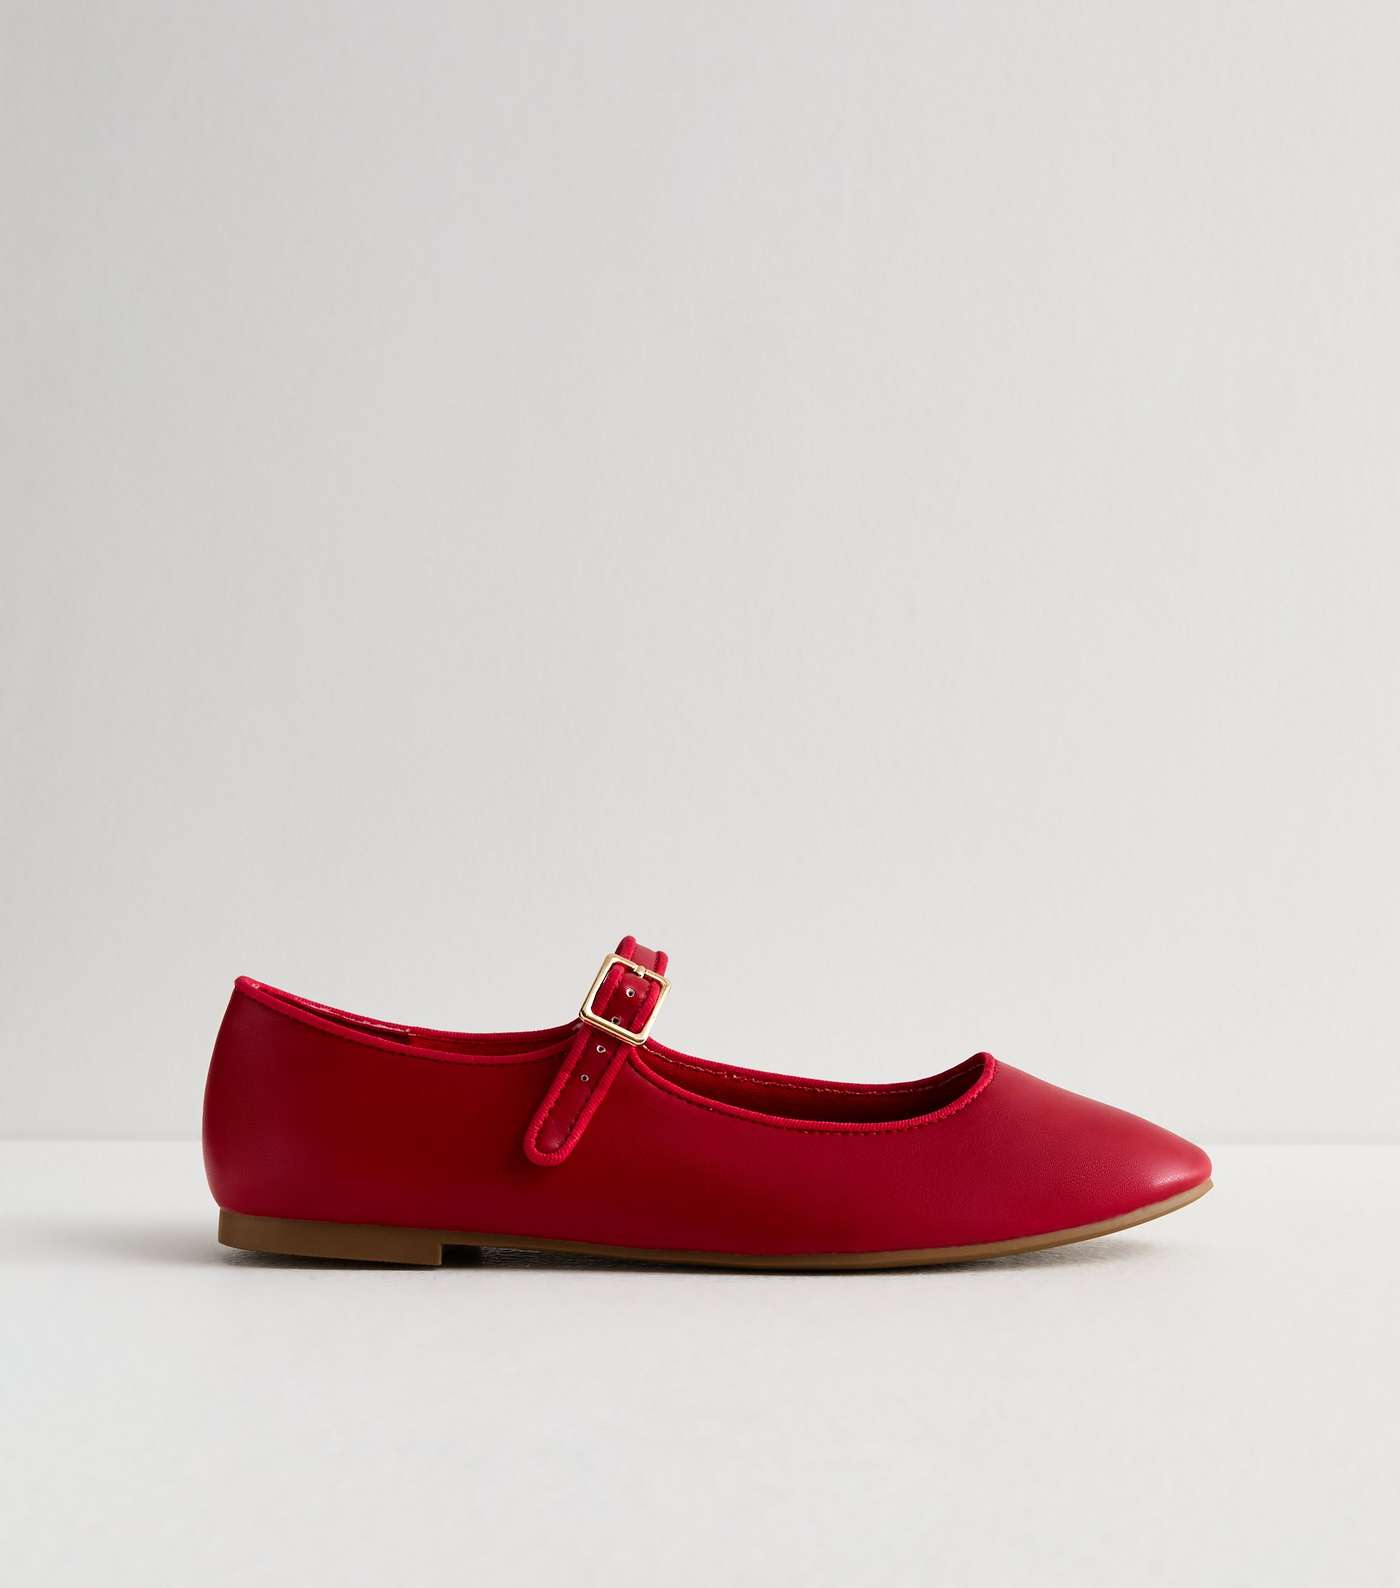 Red Leather-Look Strappy Ballerina Pumps Image 5